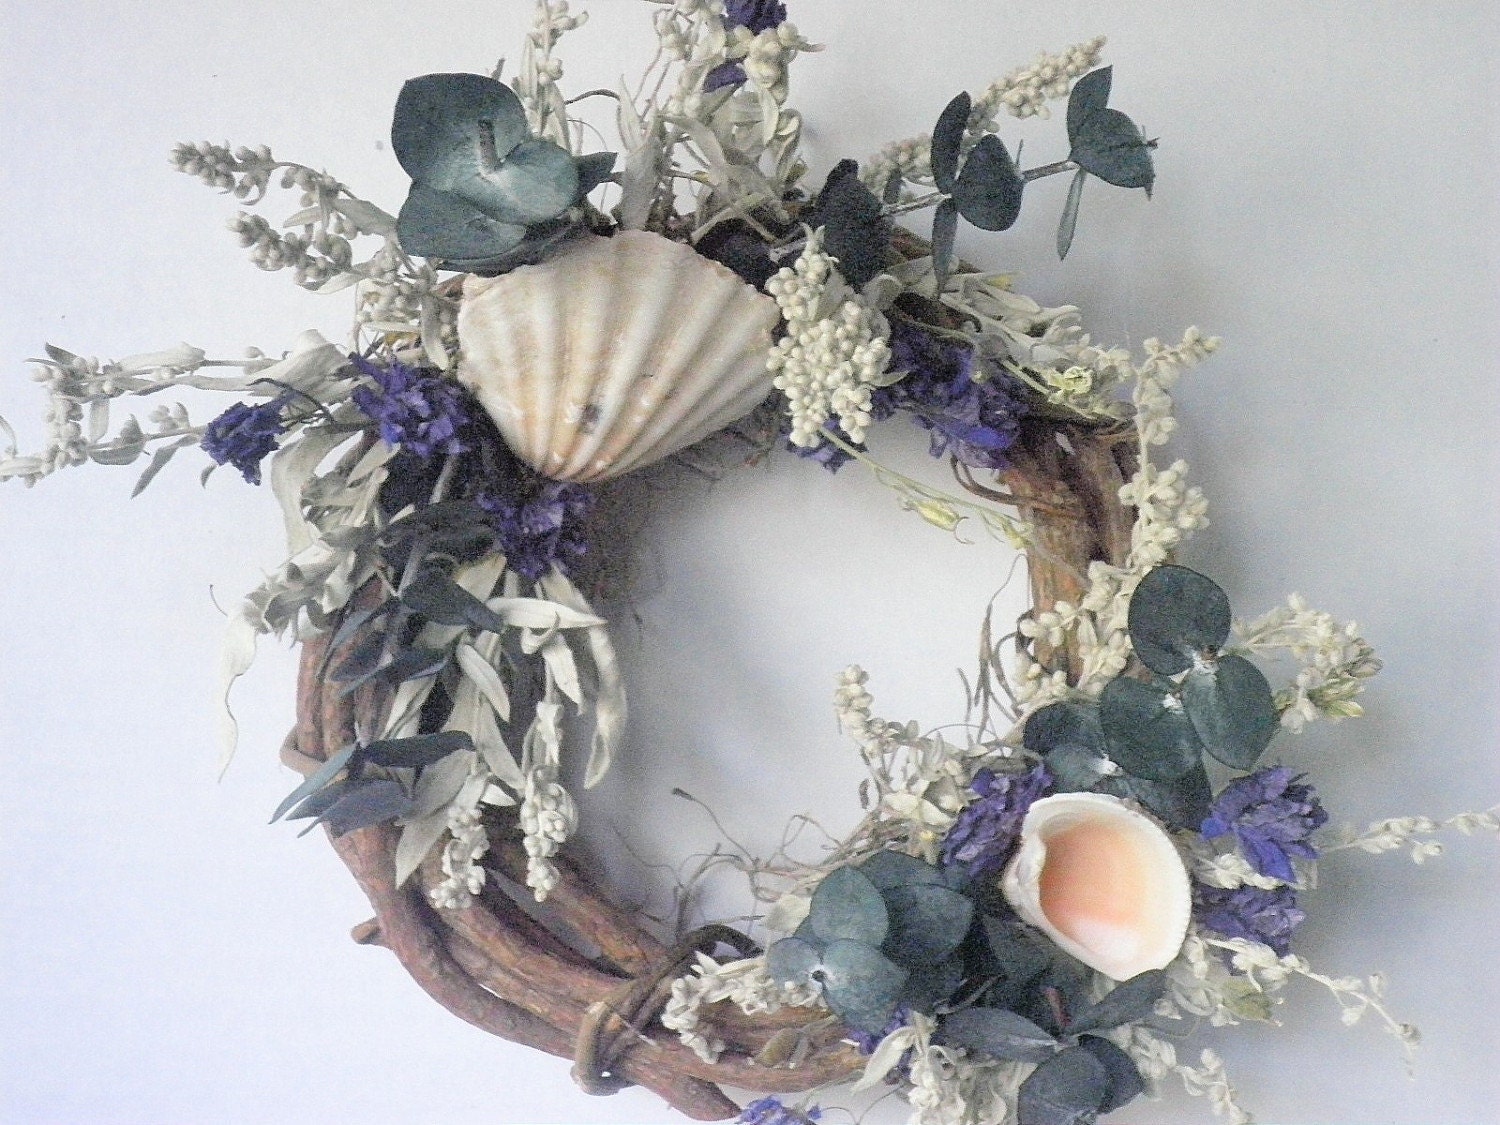 Grapevine with Scallop Shell and Dried Flowers